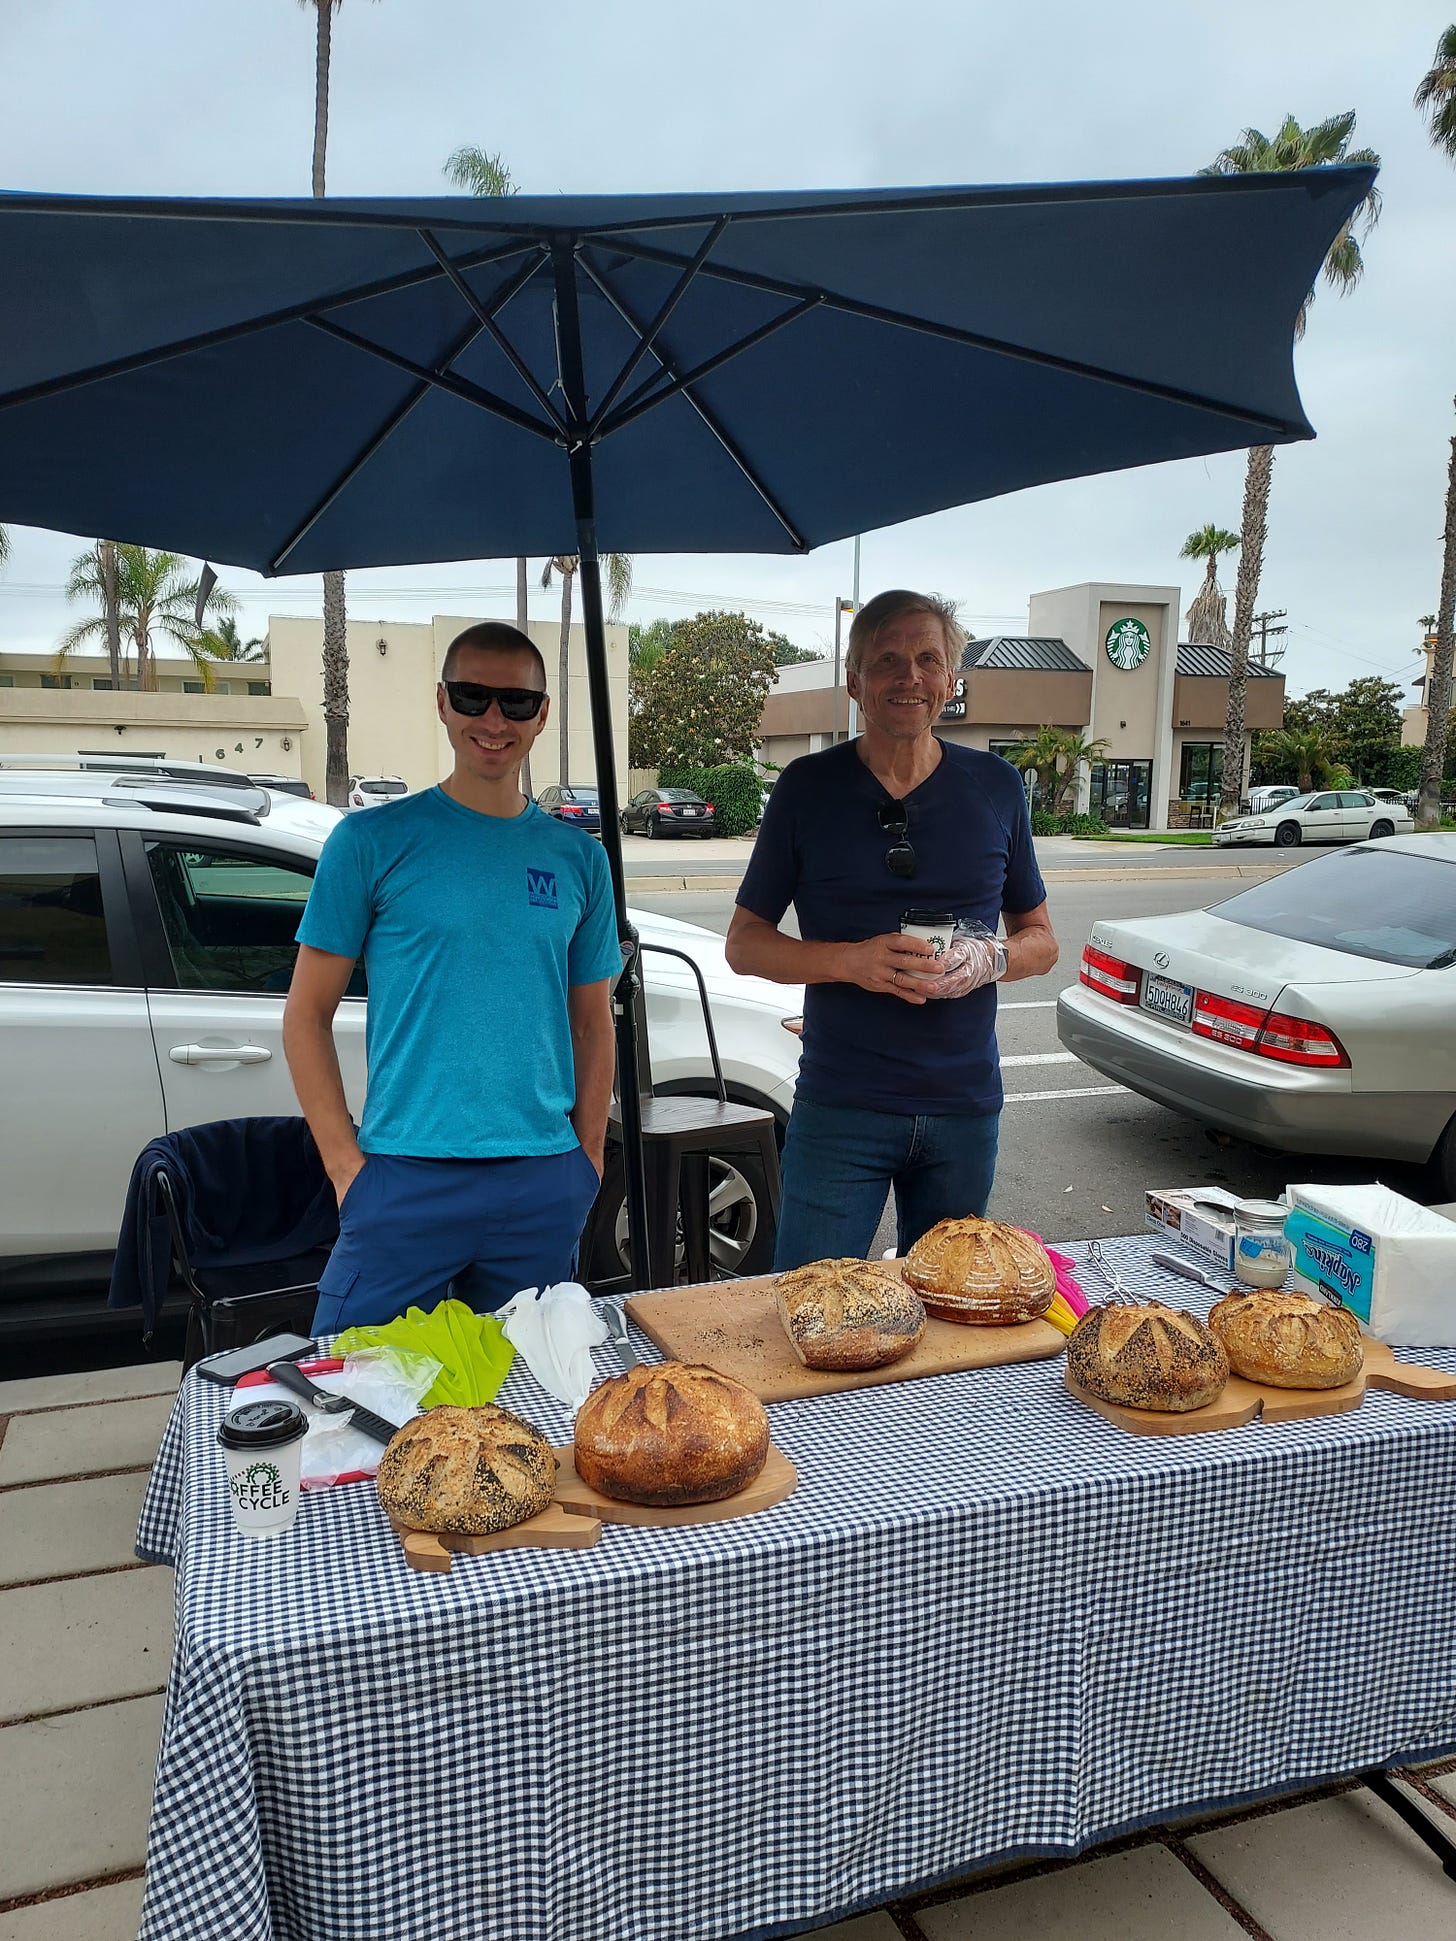 Two men stand behind a table filled with sourdough bread under a blue umbrella at a sidewalk maker's market.